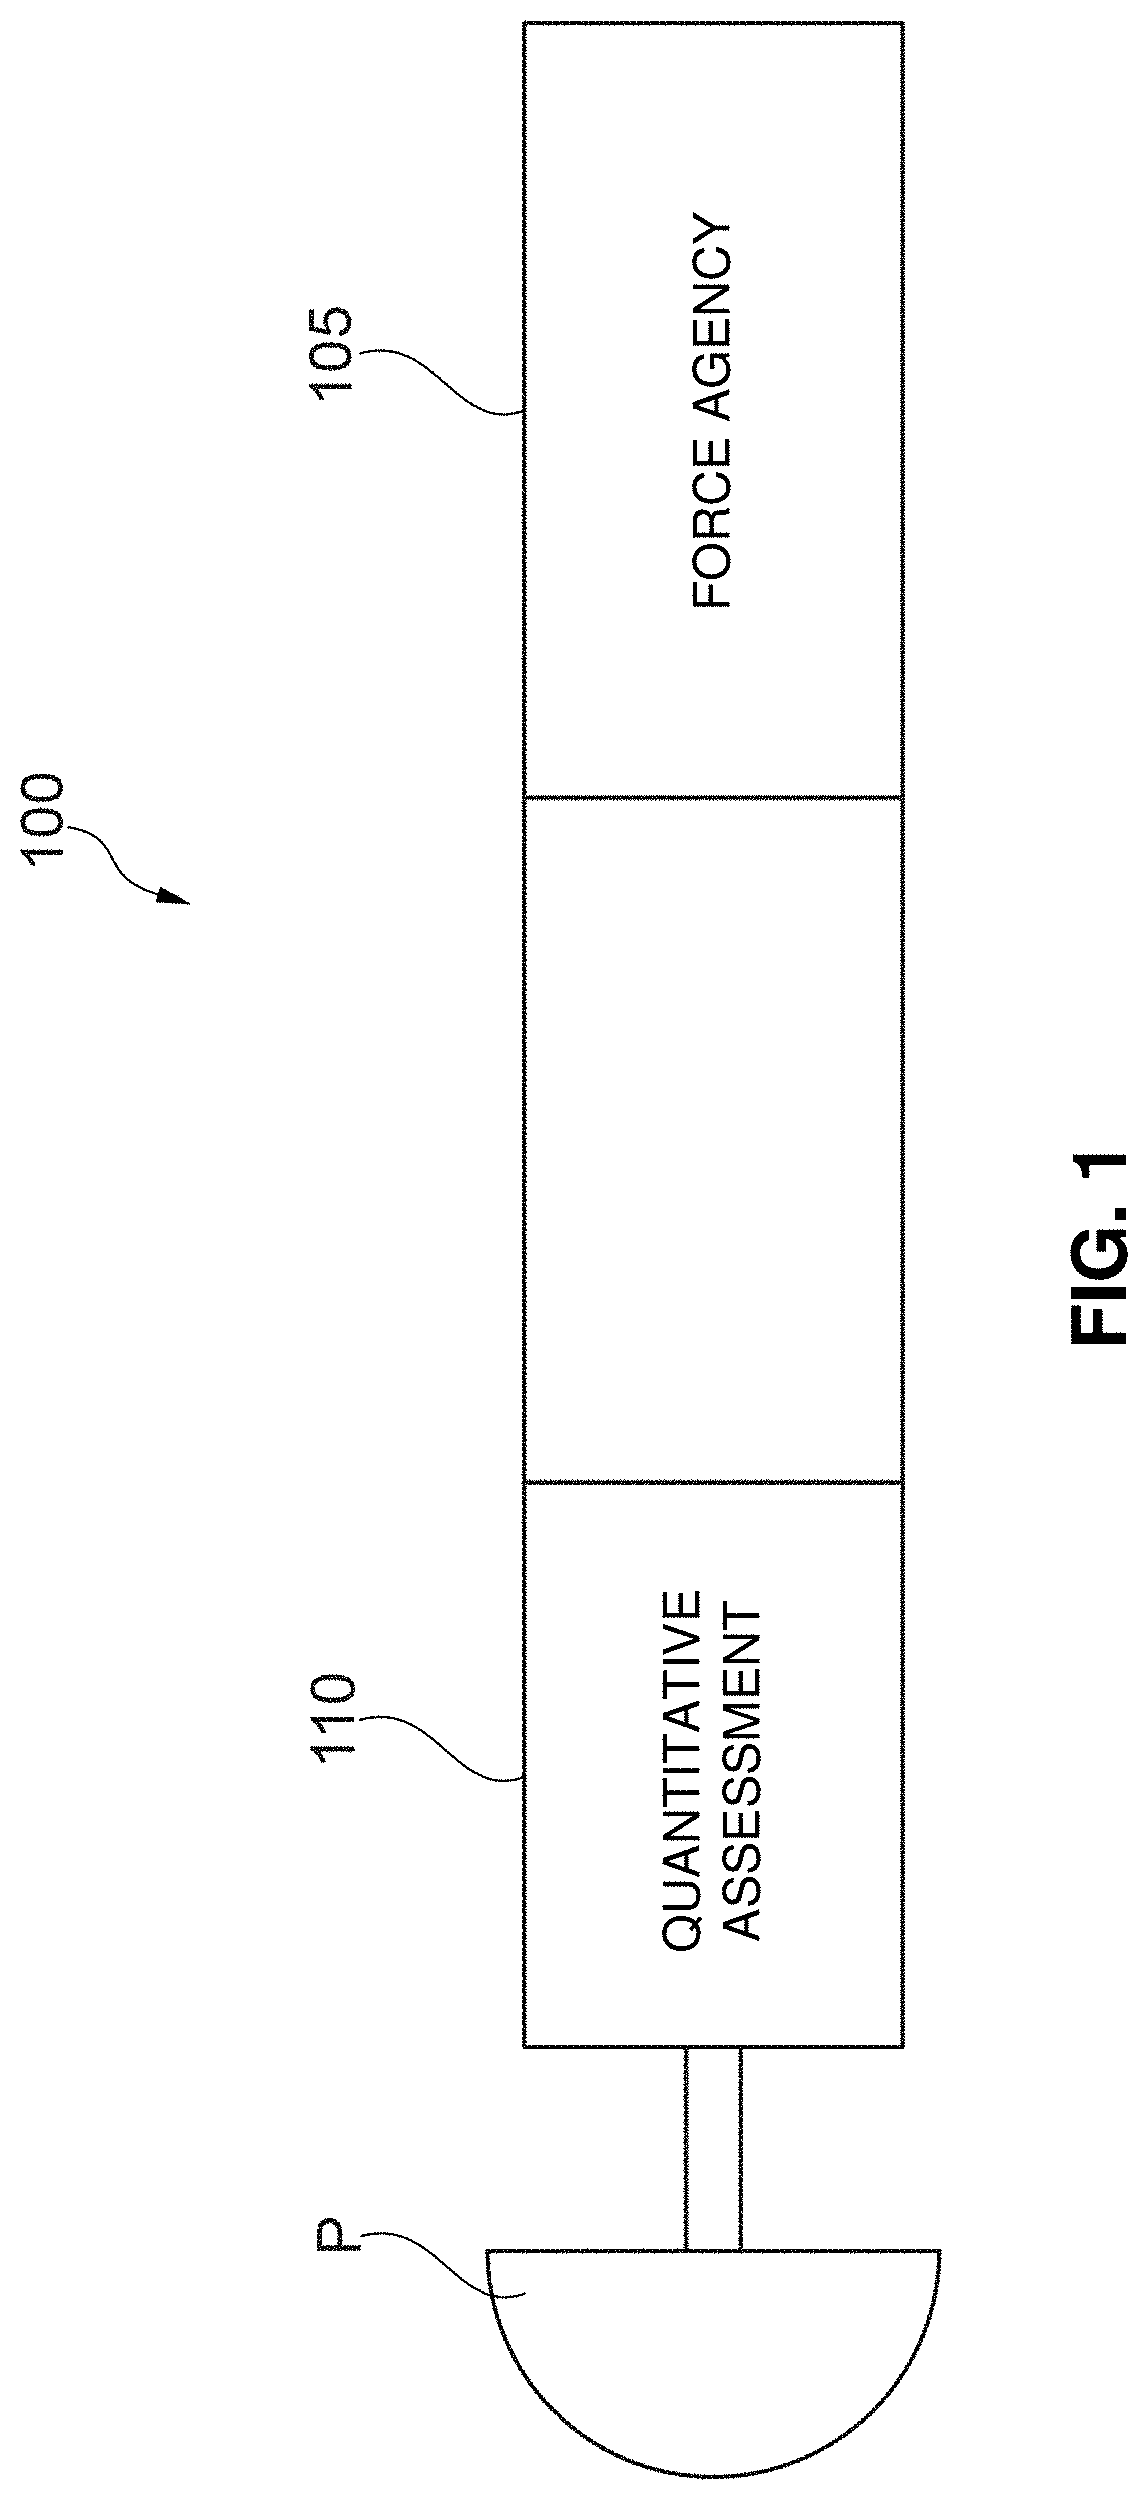 In situ system and method for sensing or monitoring